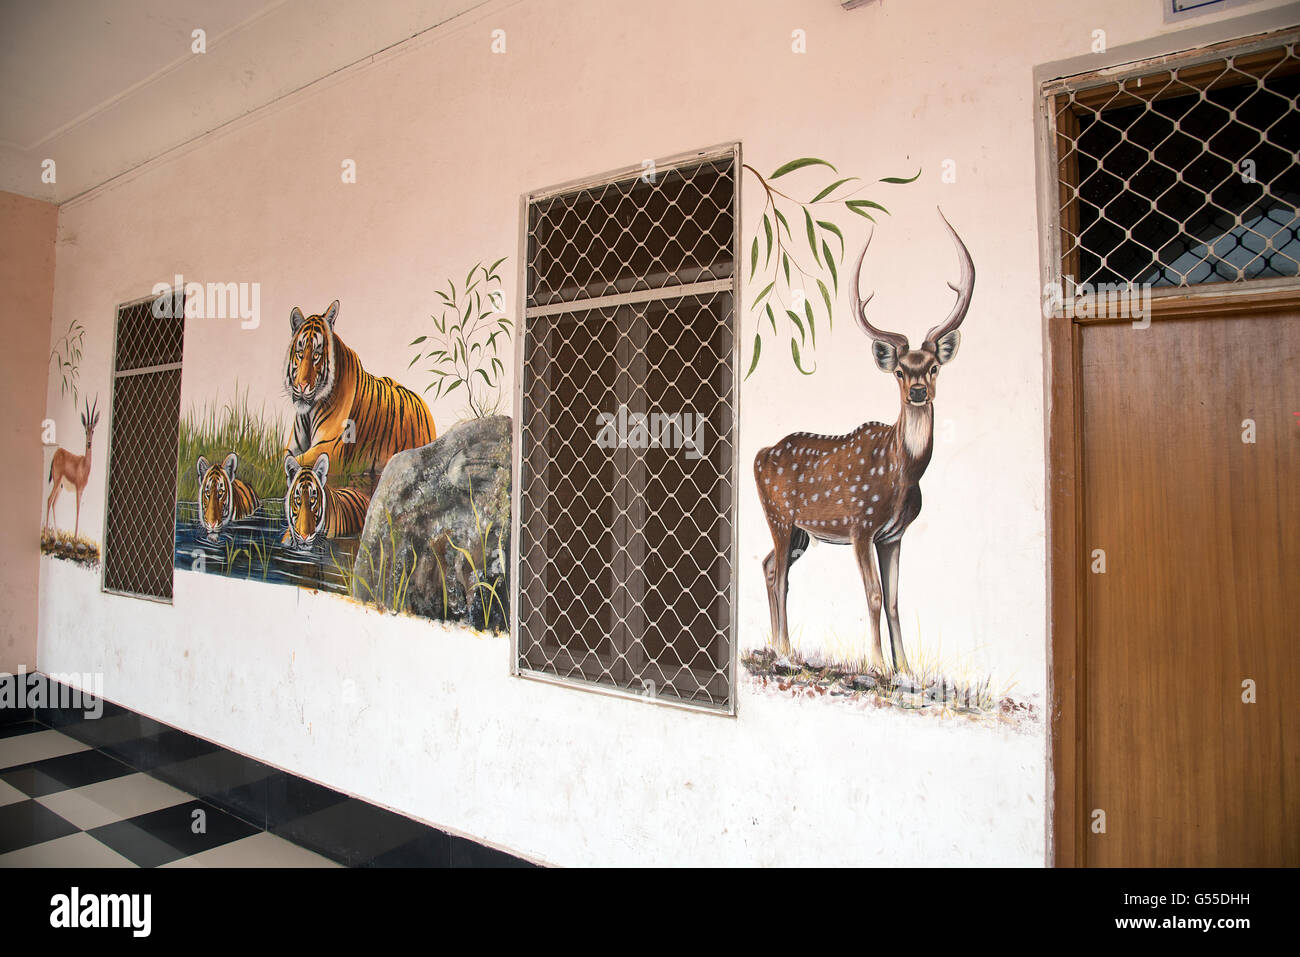 The image of Painting was taken at Sawai Madhopur Railway station, India Stock Photo